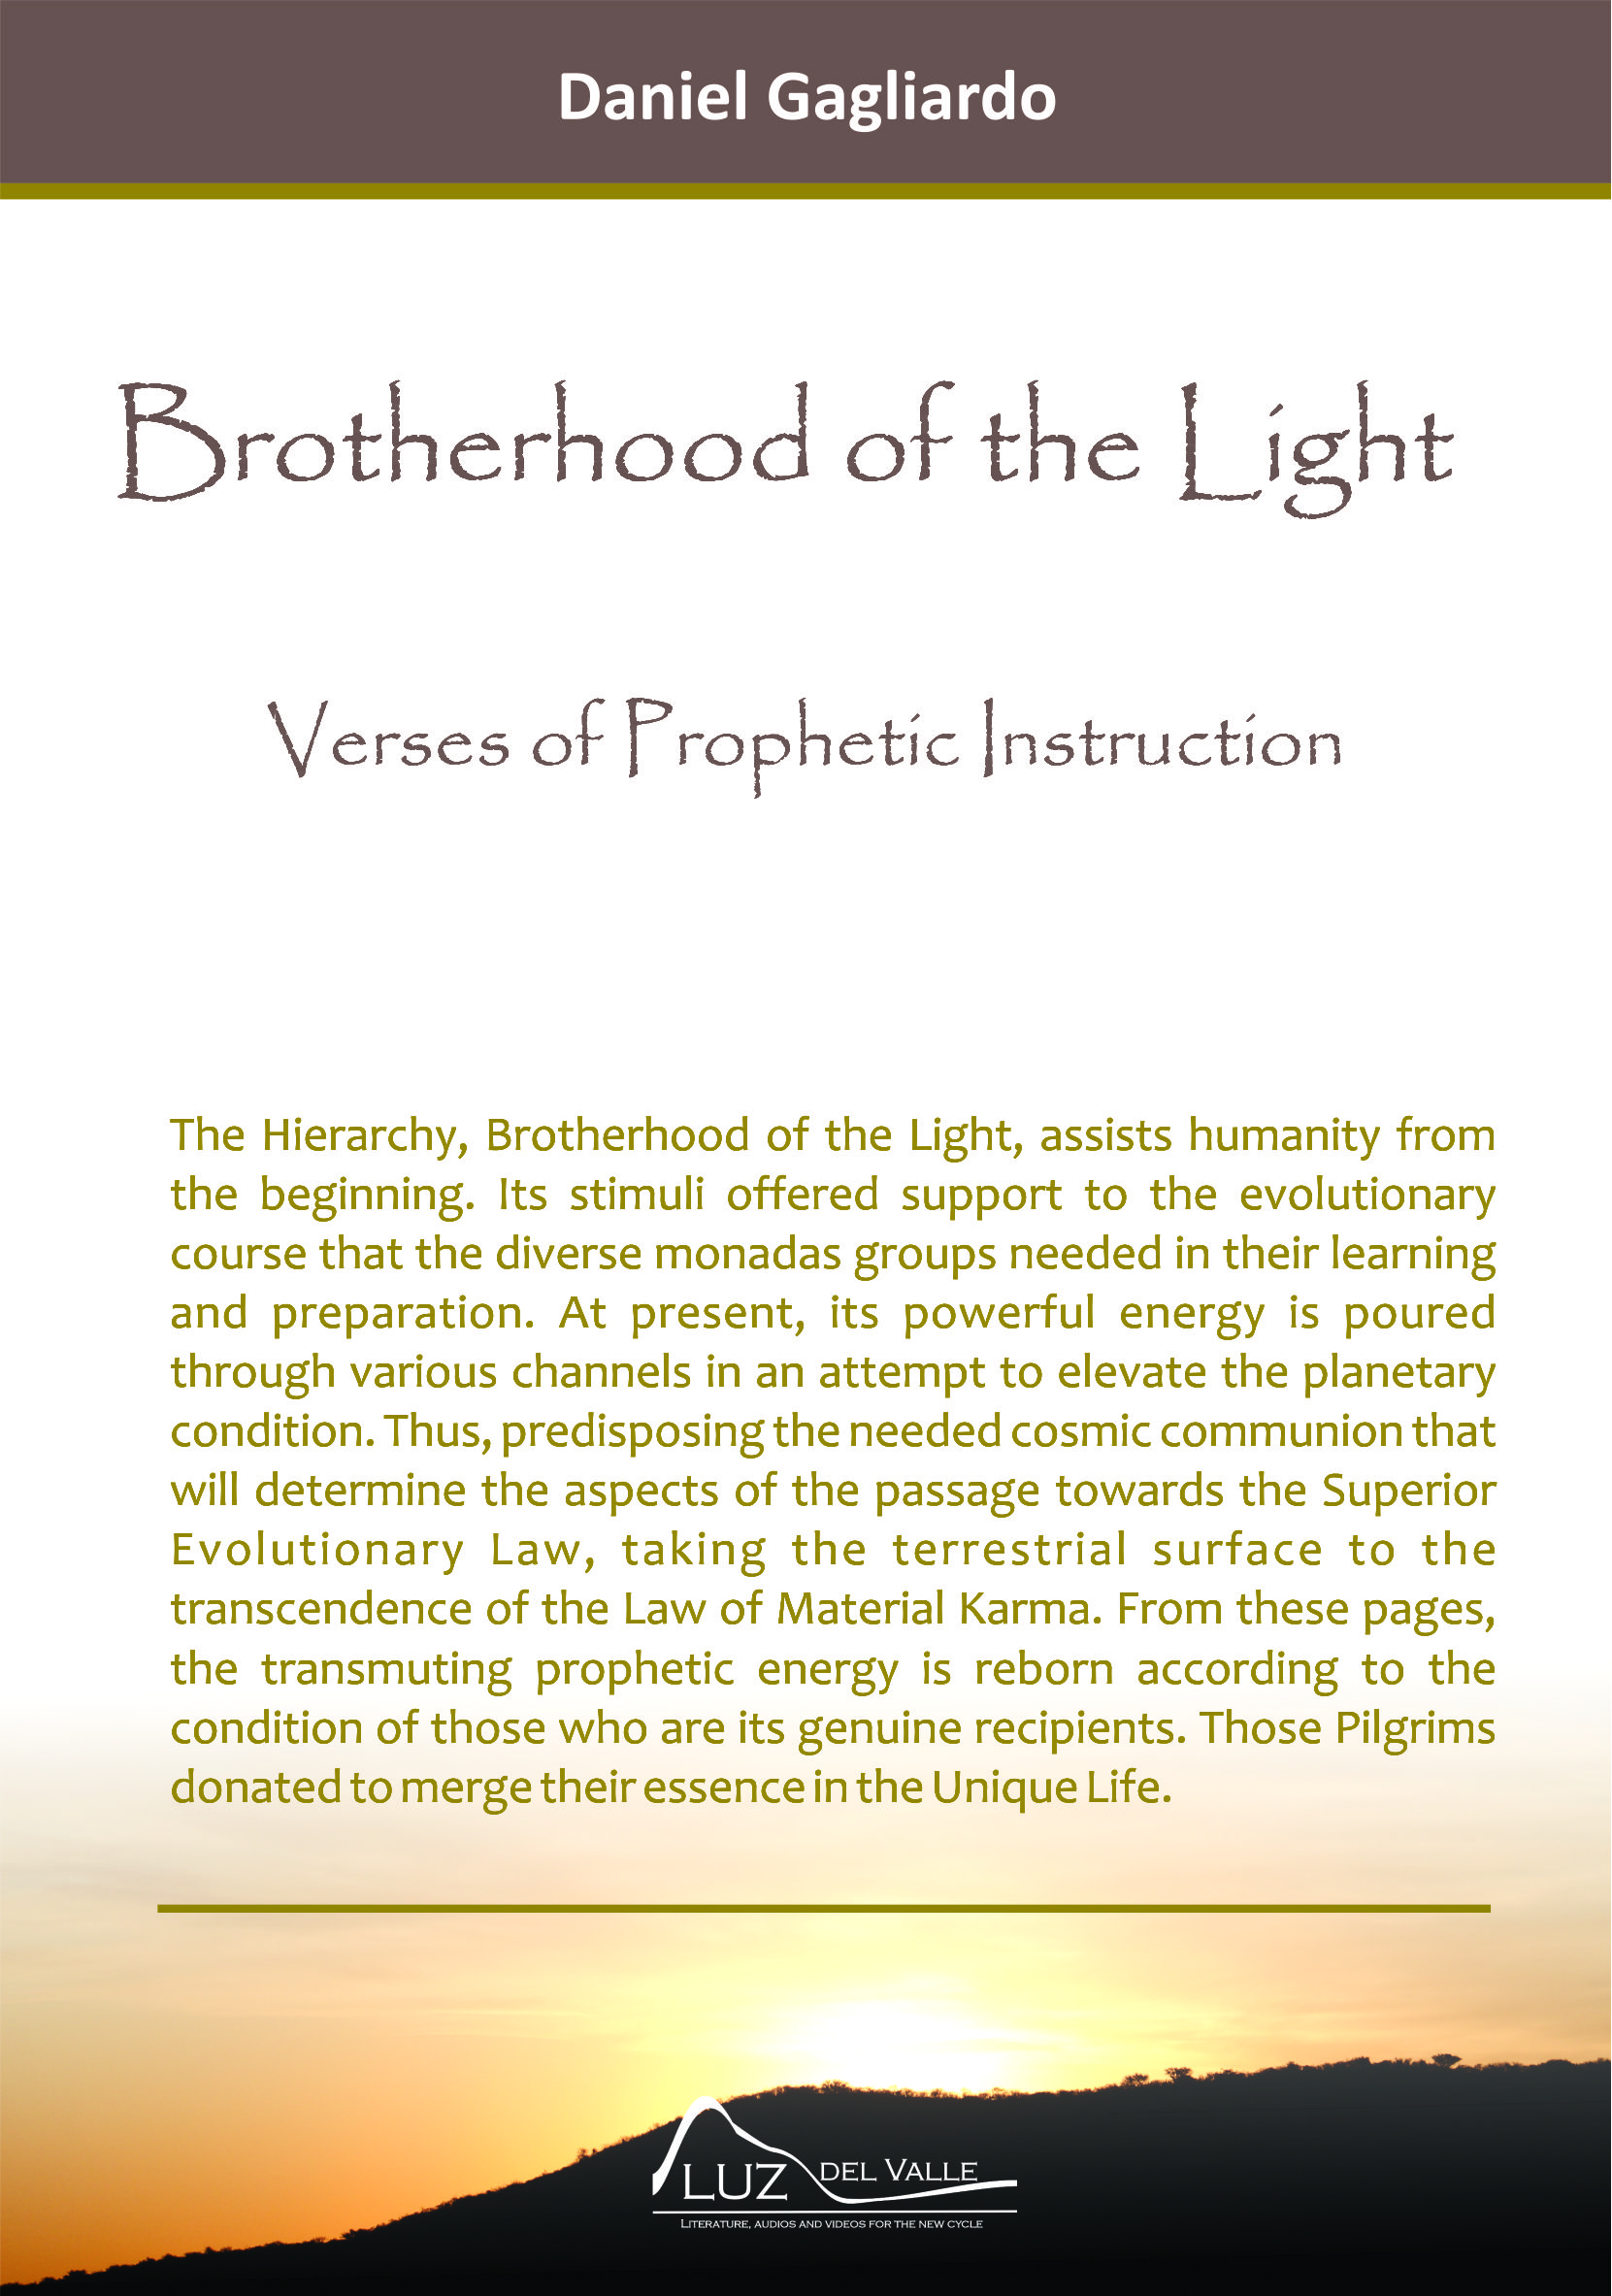 The Brotherhood of  the Light Verses of Prophetic Instruction